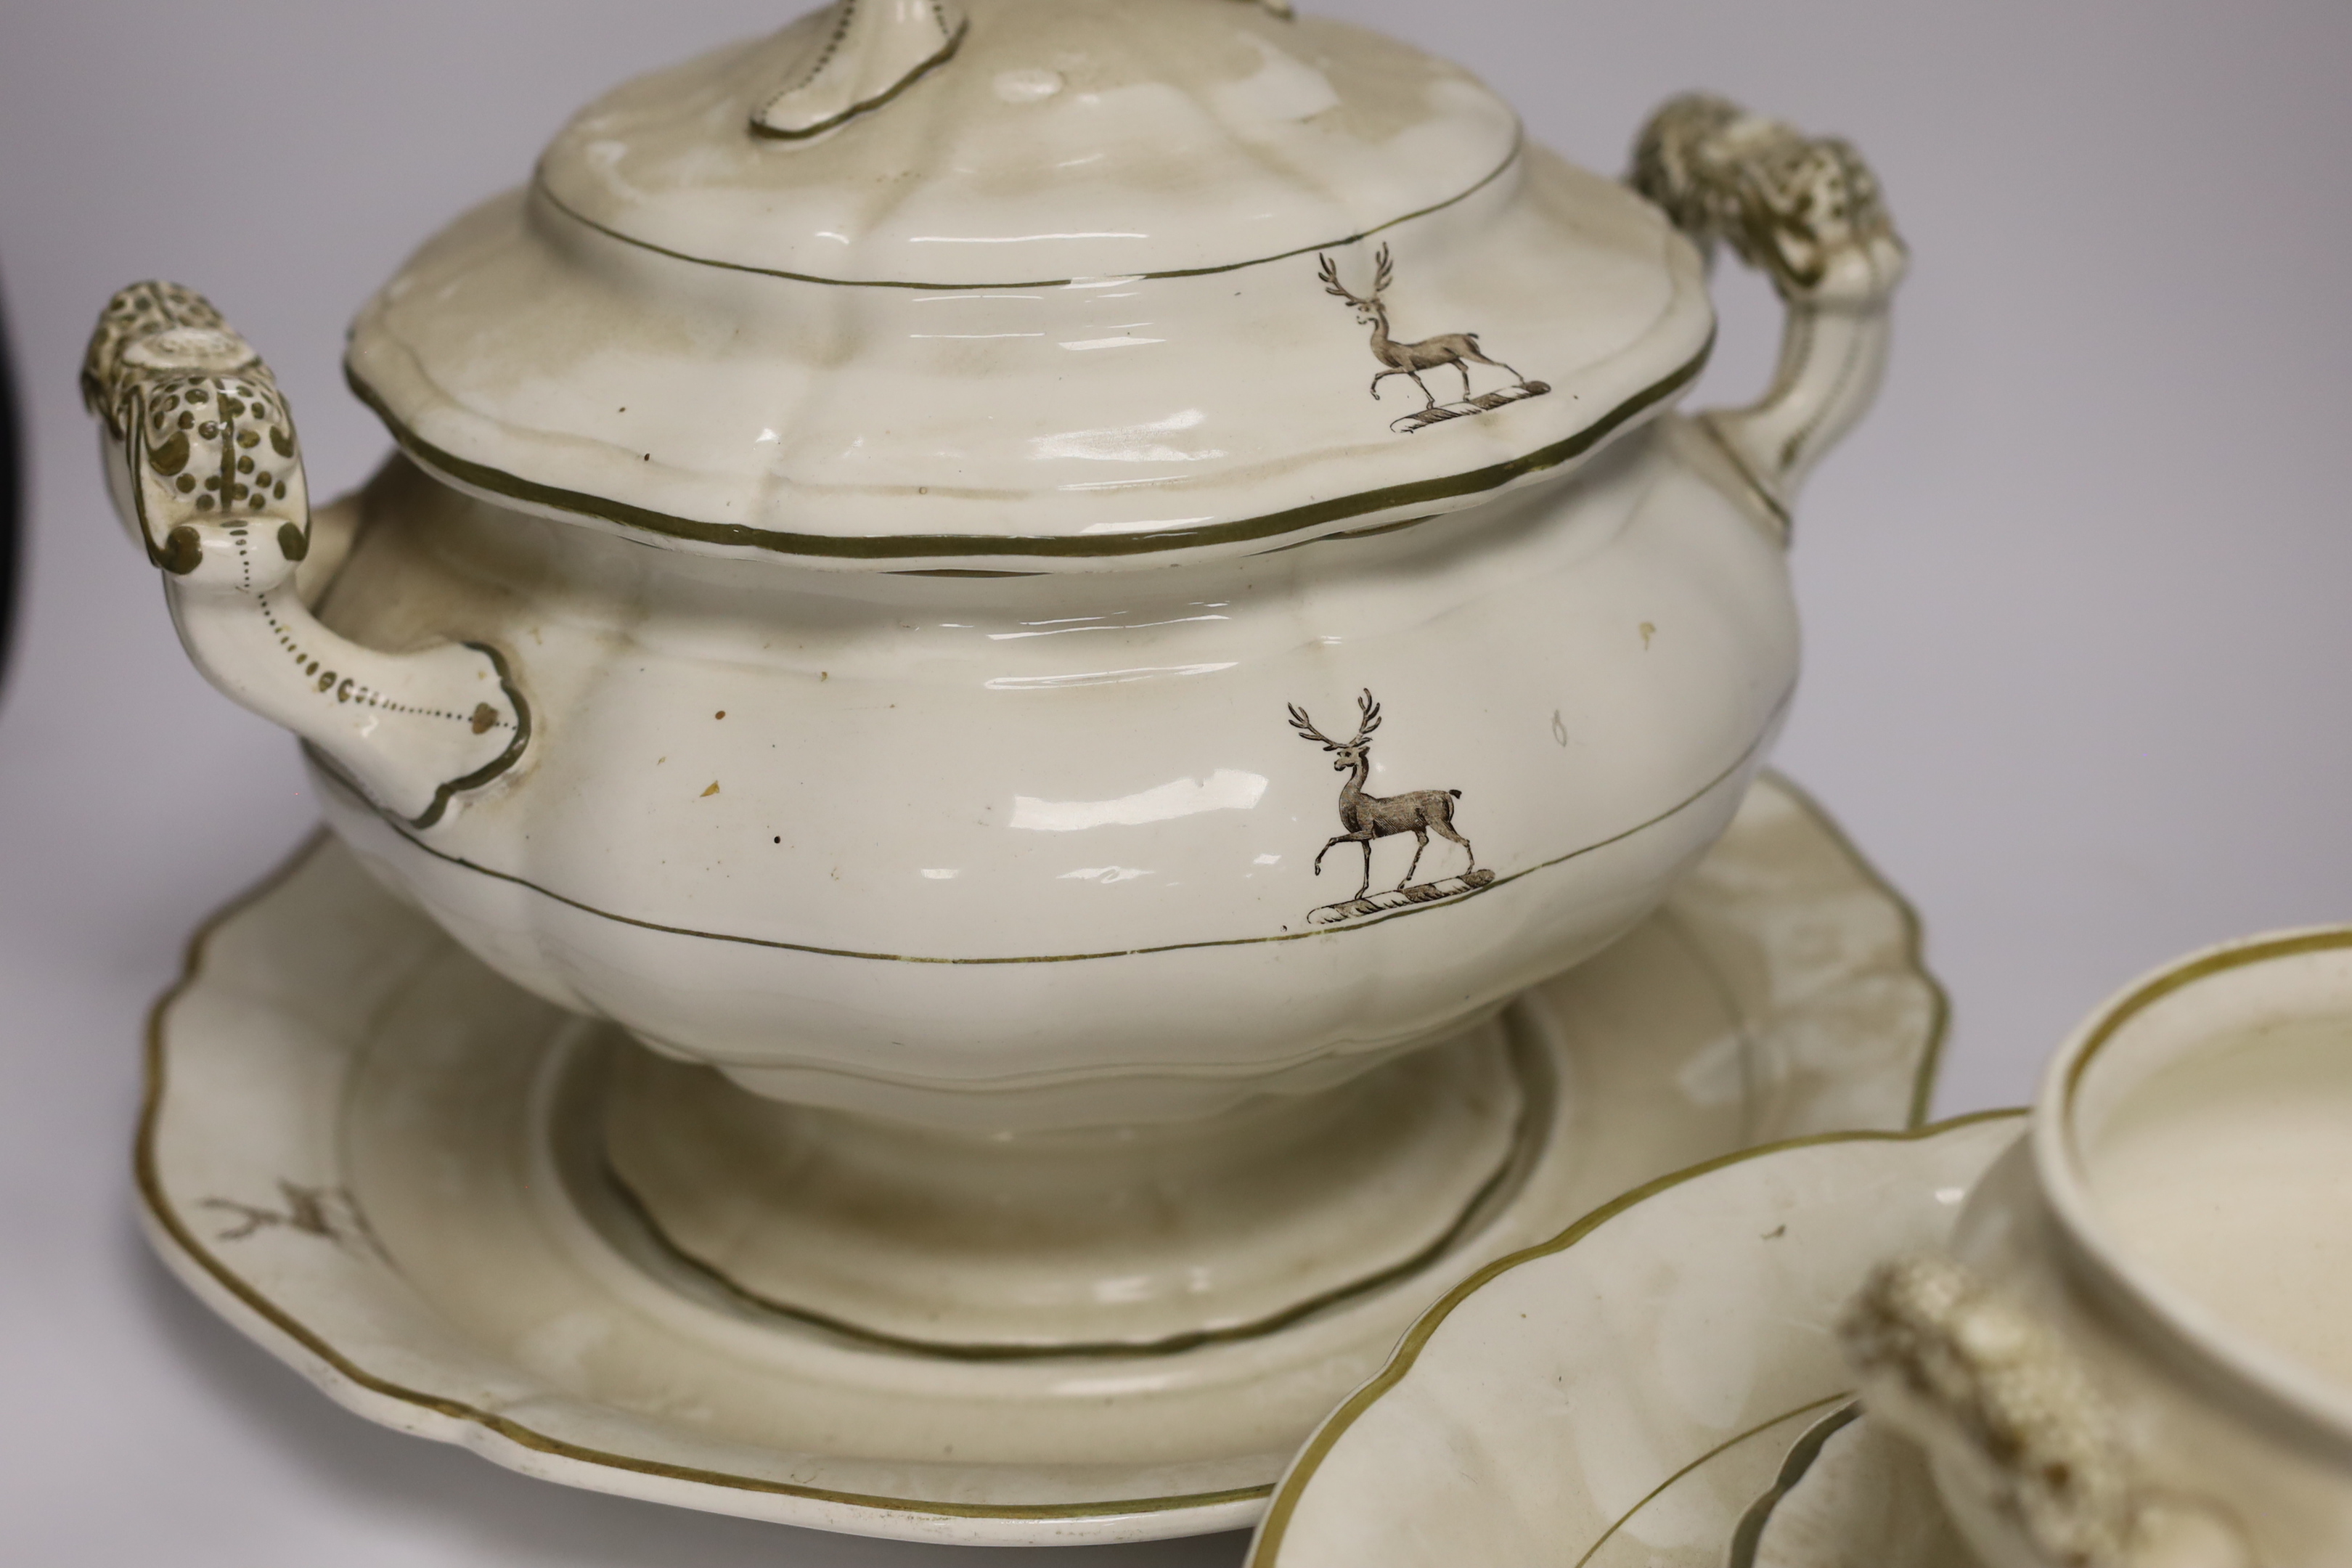 Copeland late Spode crested part dinner set comprising tureen and stand, bowl and stand and two - Image 3 of 5